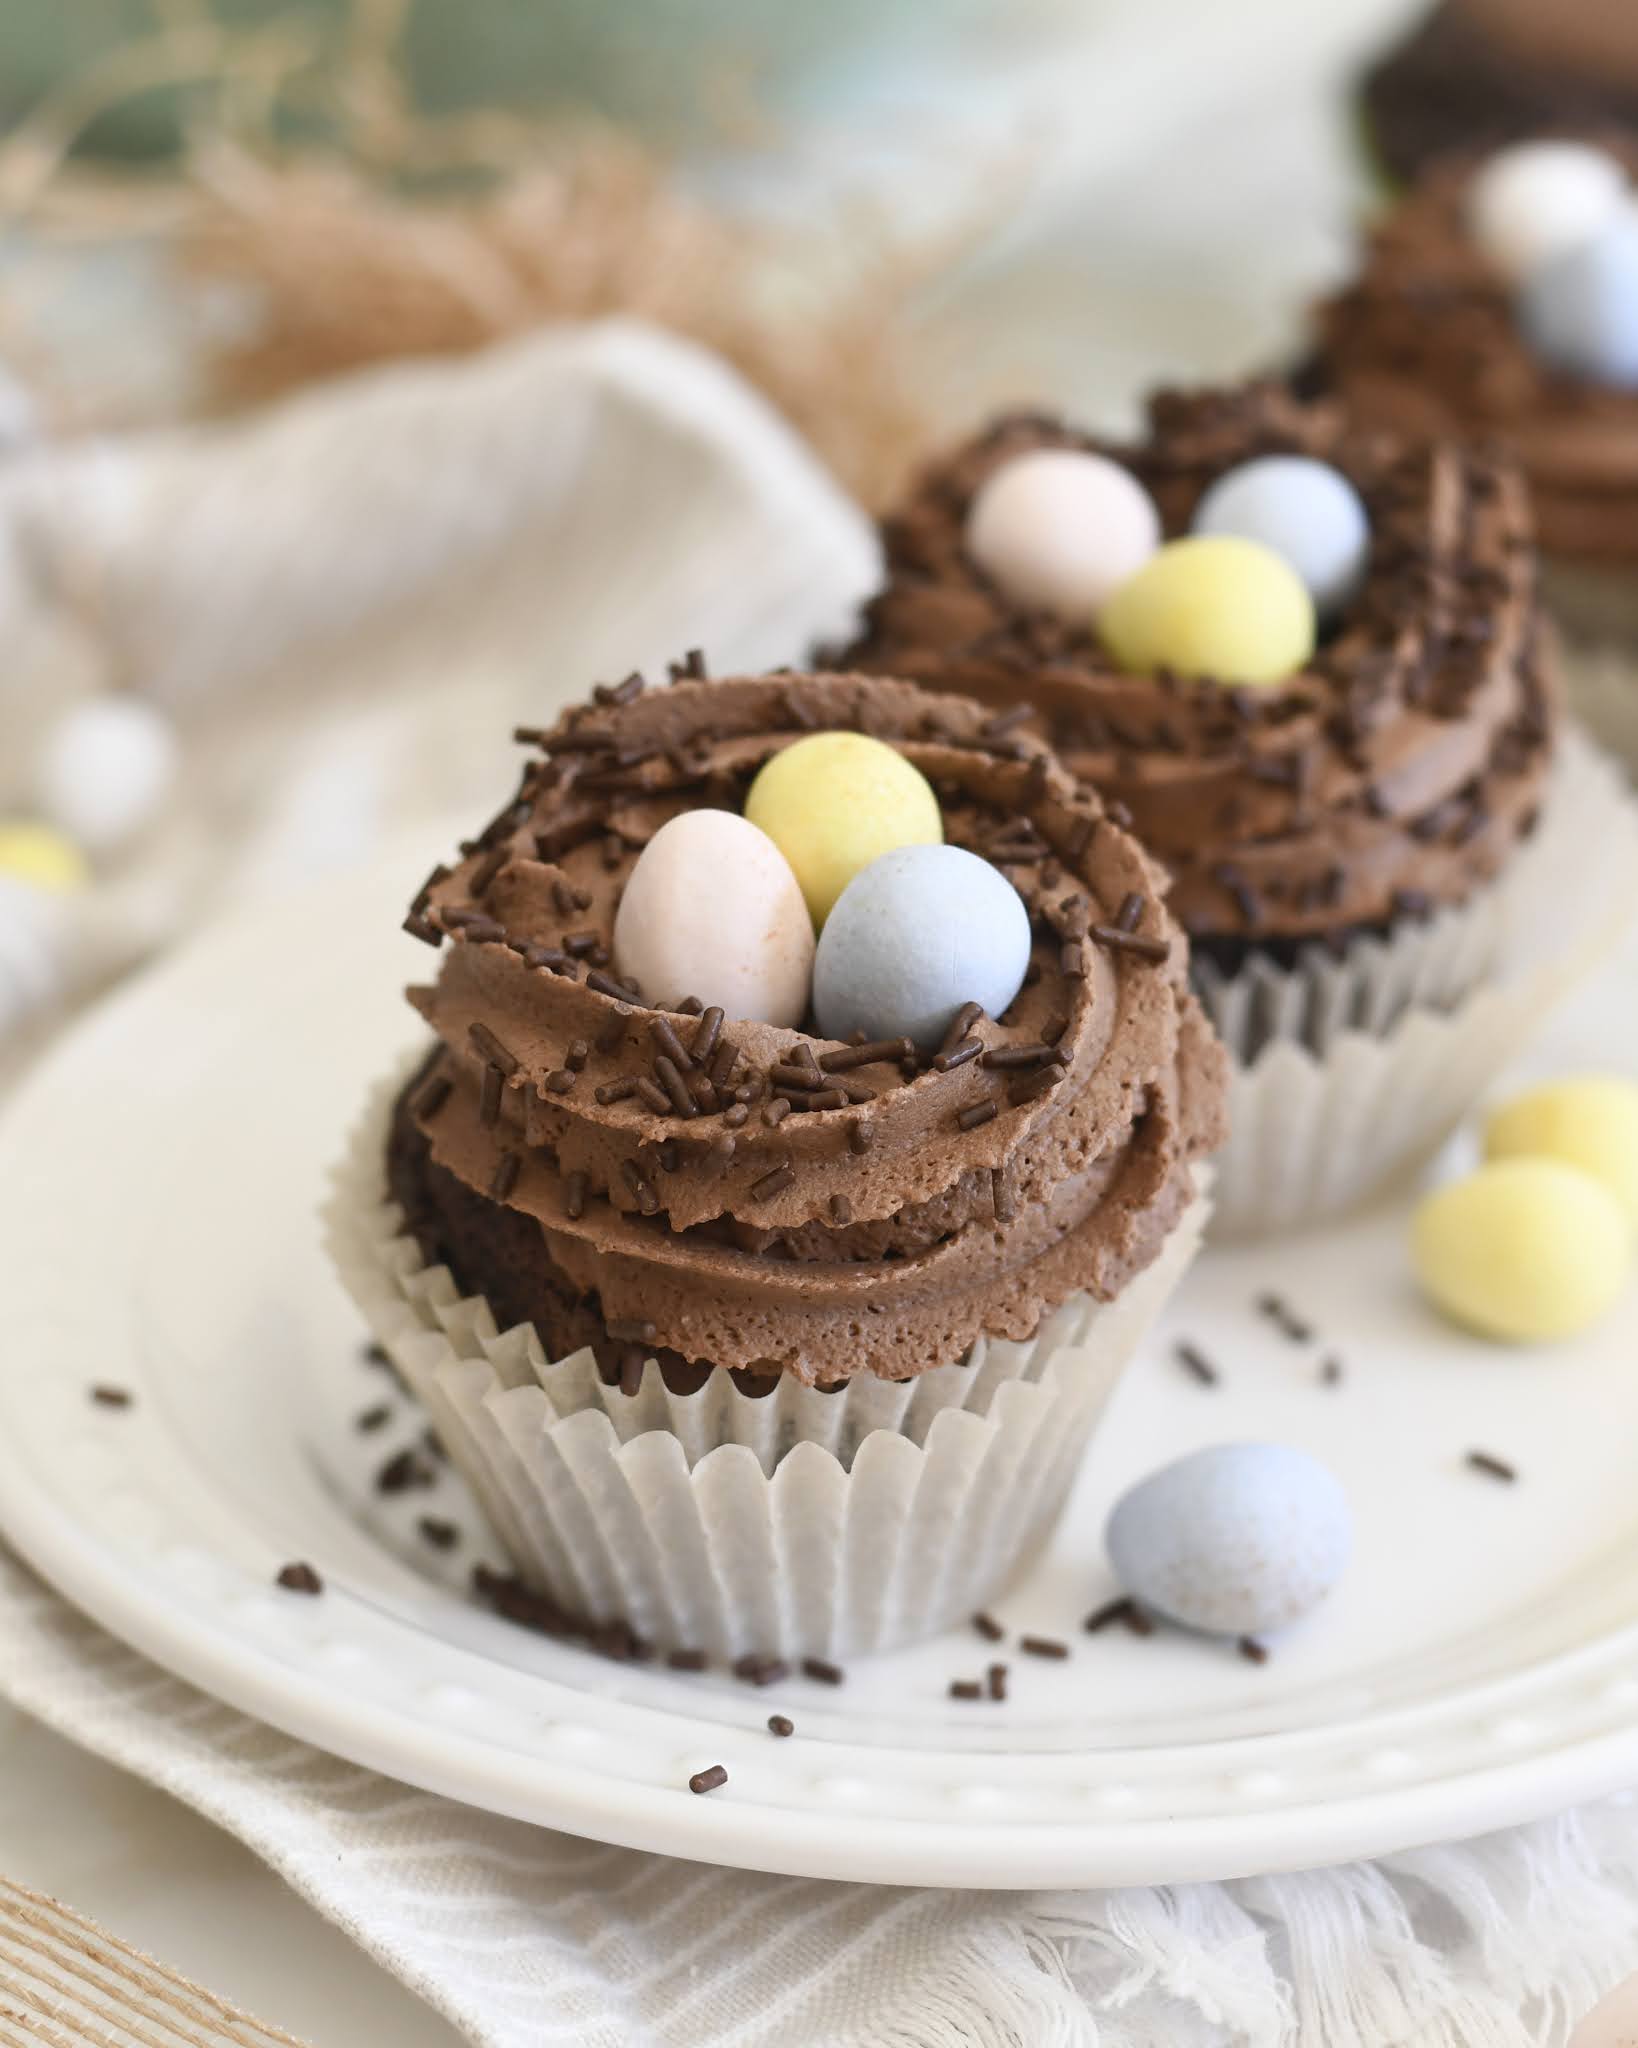 Cooking with Manuela: Easter Egg Nest Chocolate Cupcakes